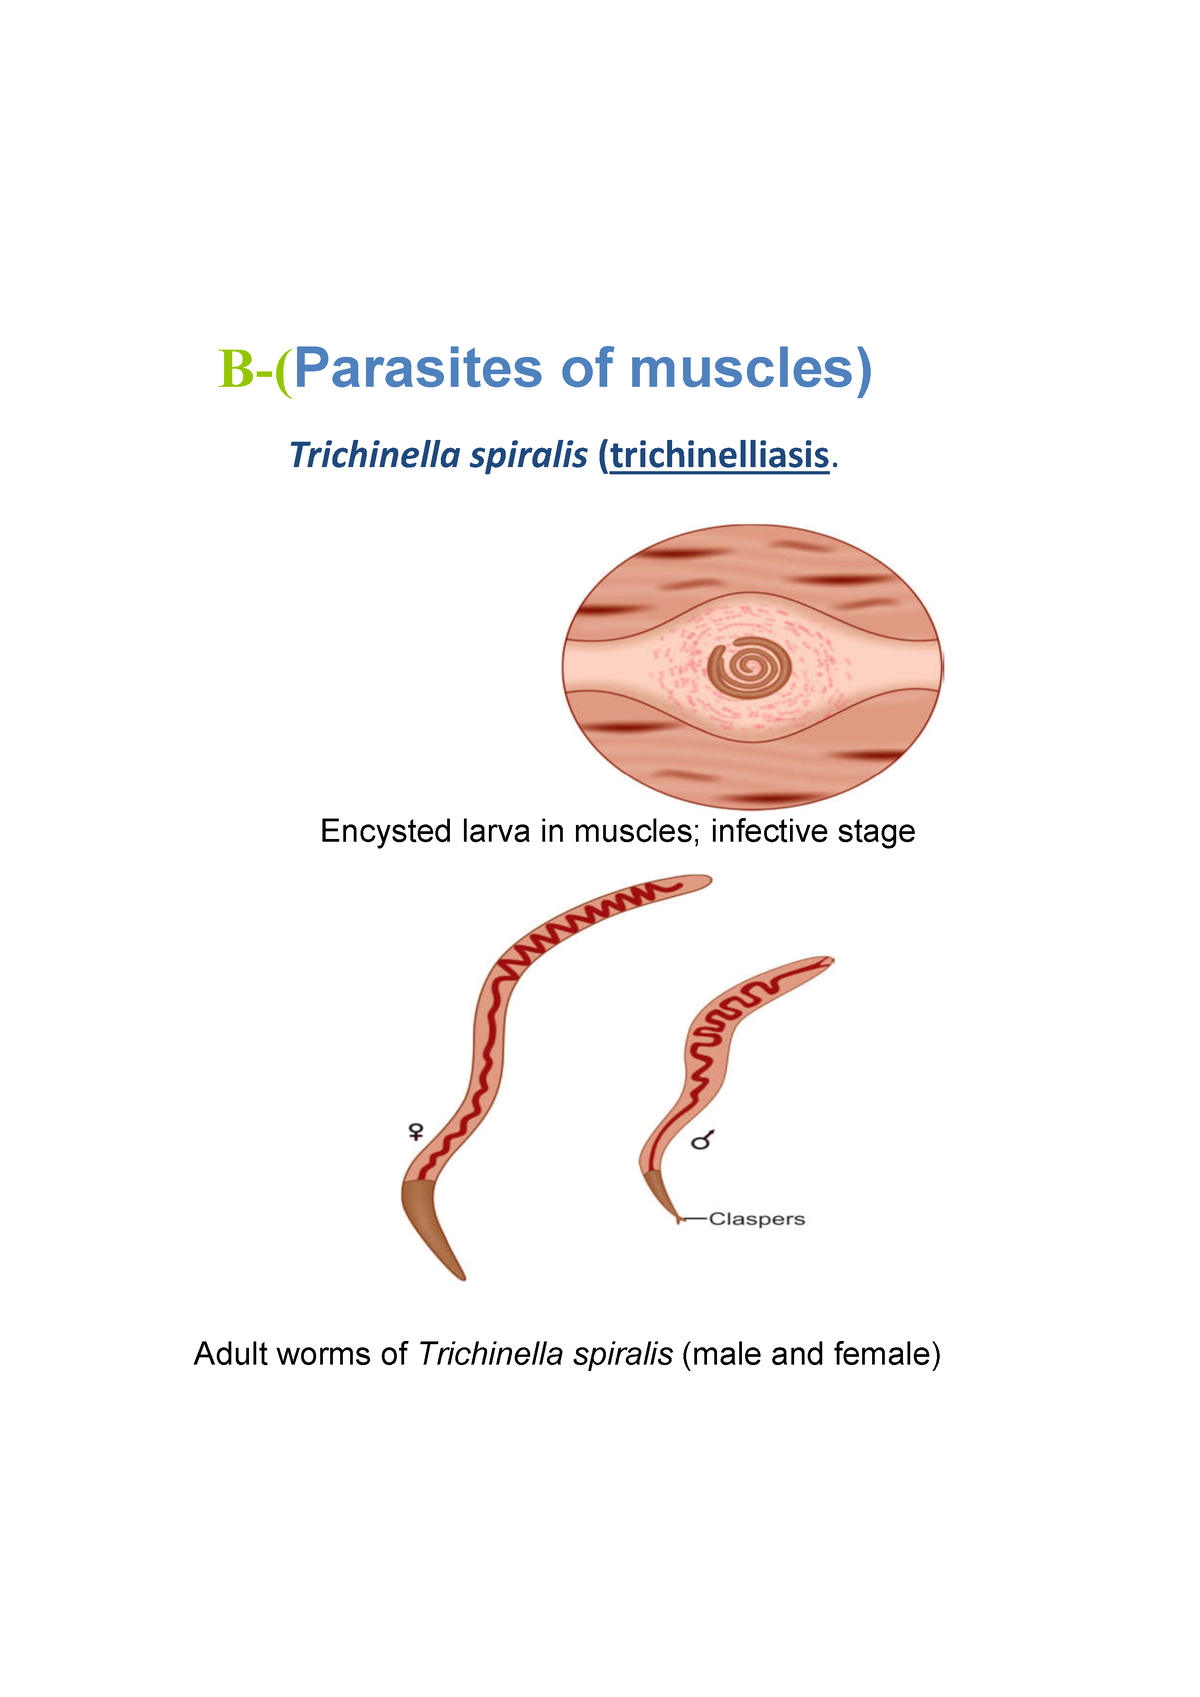 trichinella spiralis in muscle labeled